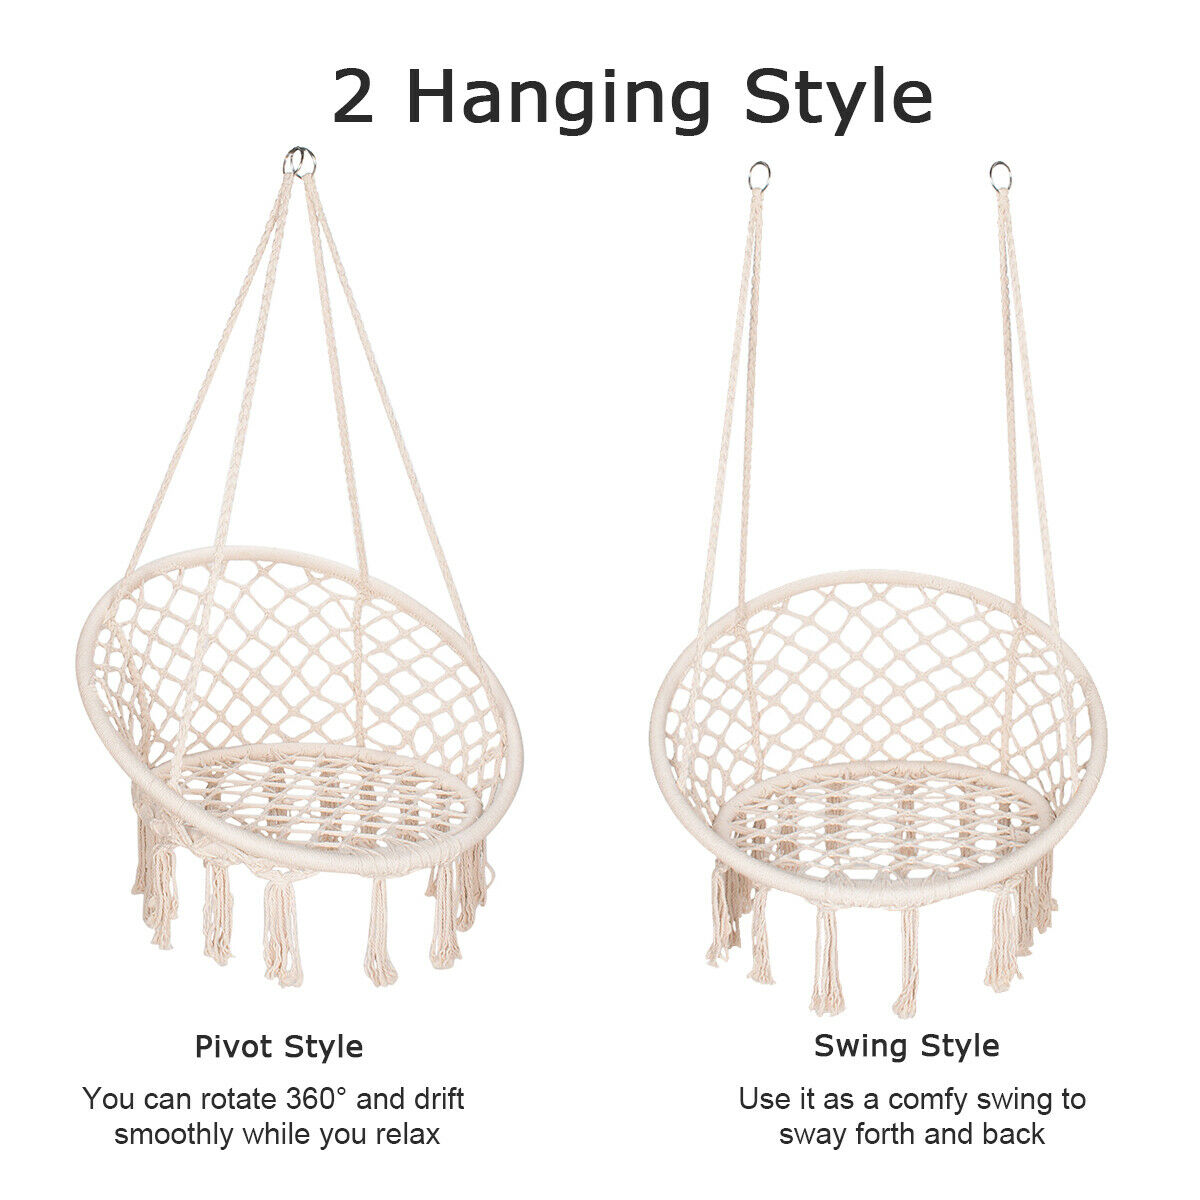 Round Hammock Chair Outdoor Indoor Dormitory Bedroom Yard For Child Adult Swinging Hanging Single Safety Chair Hammock